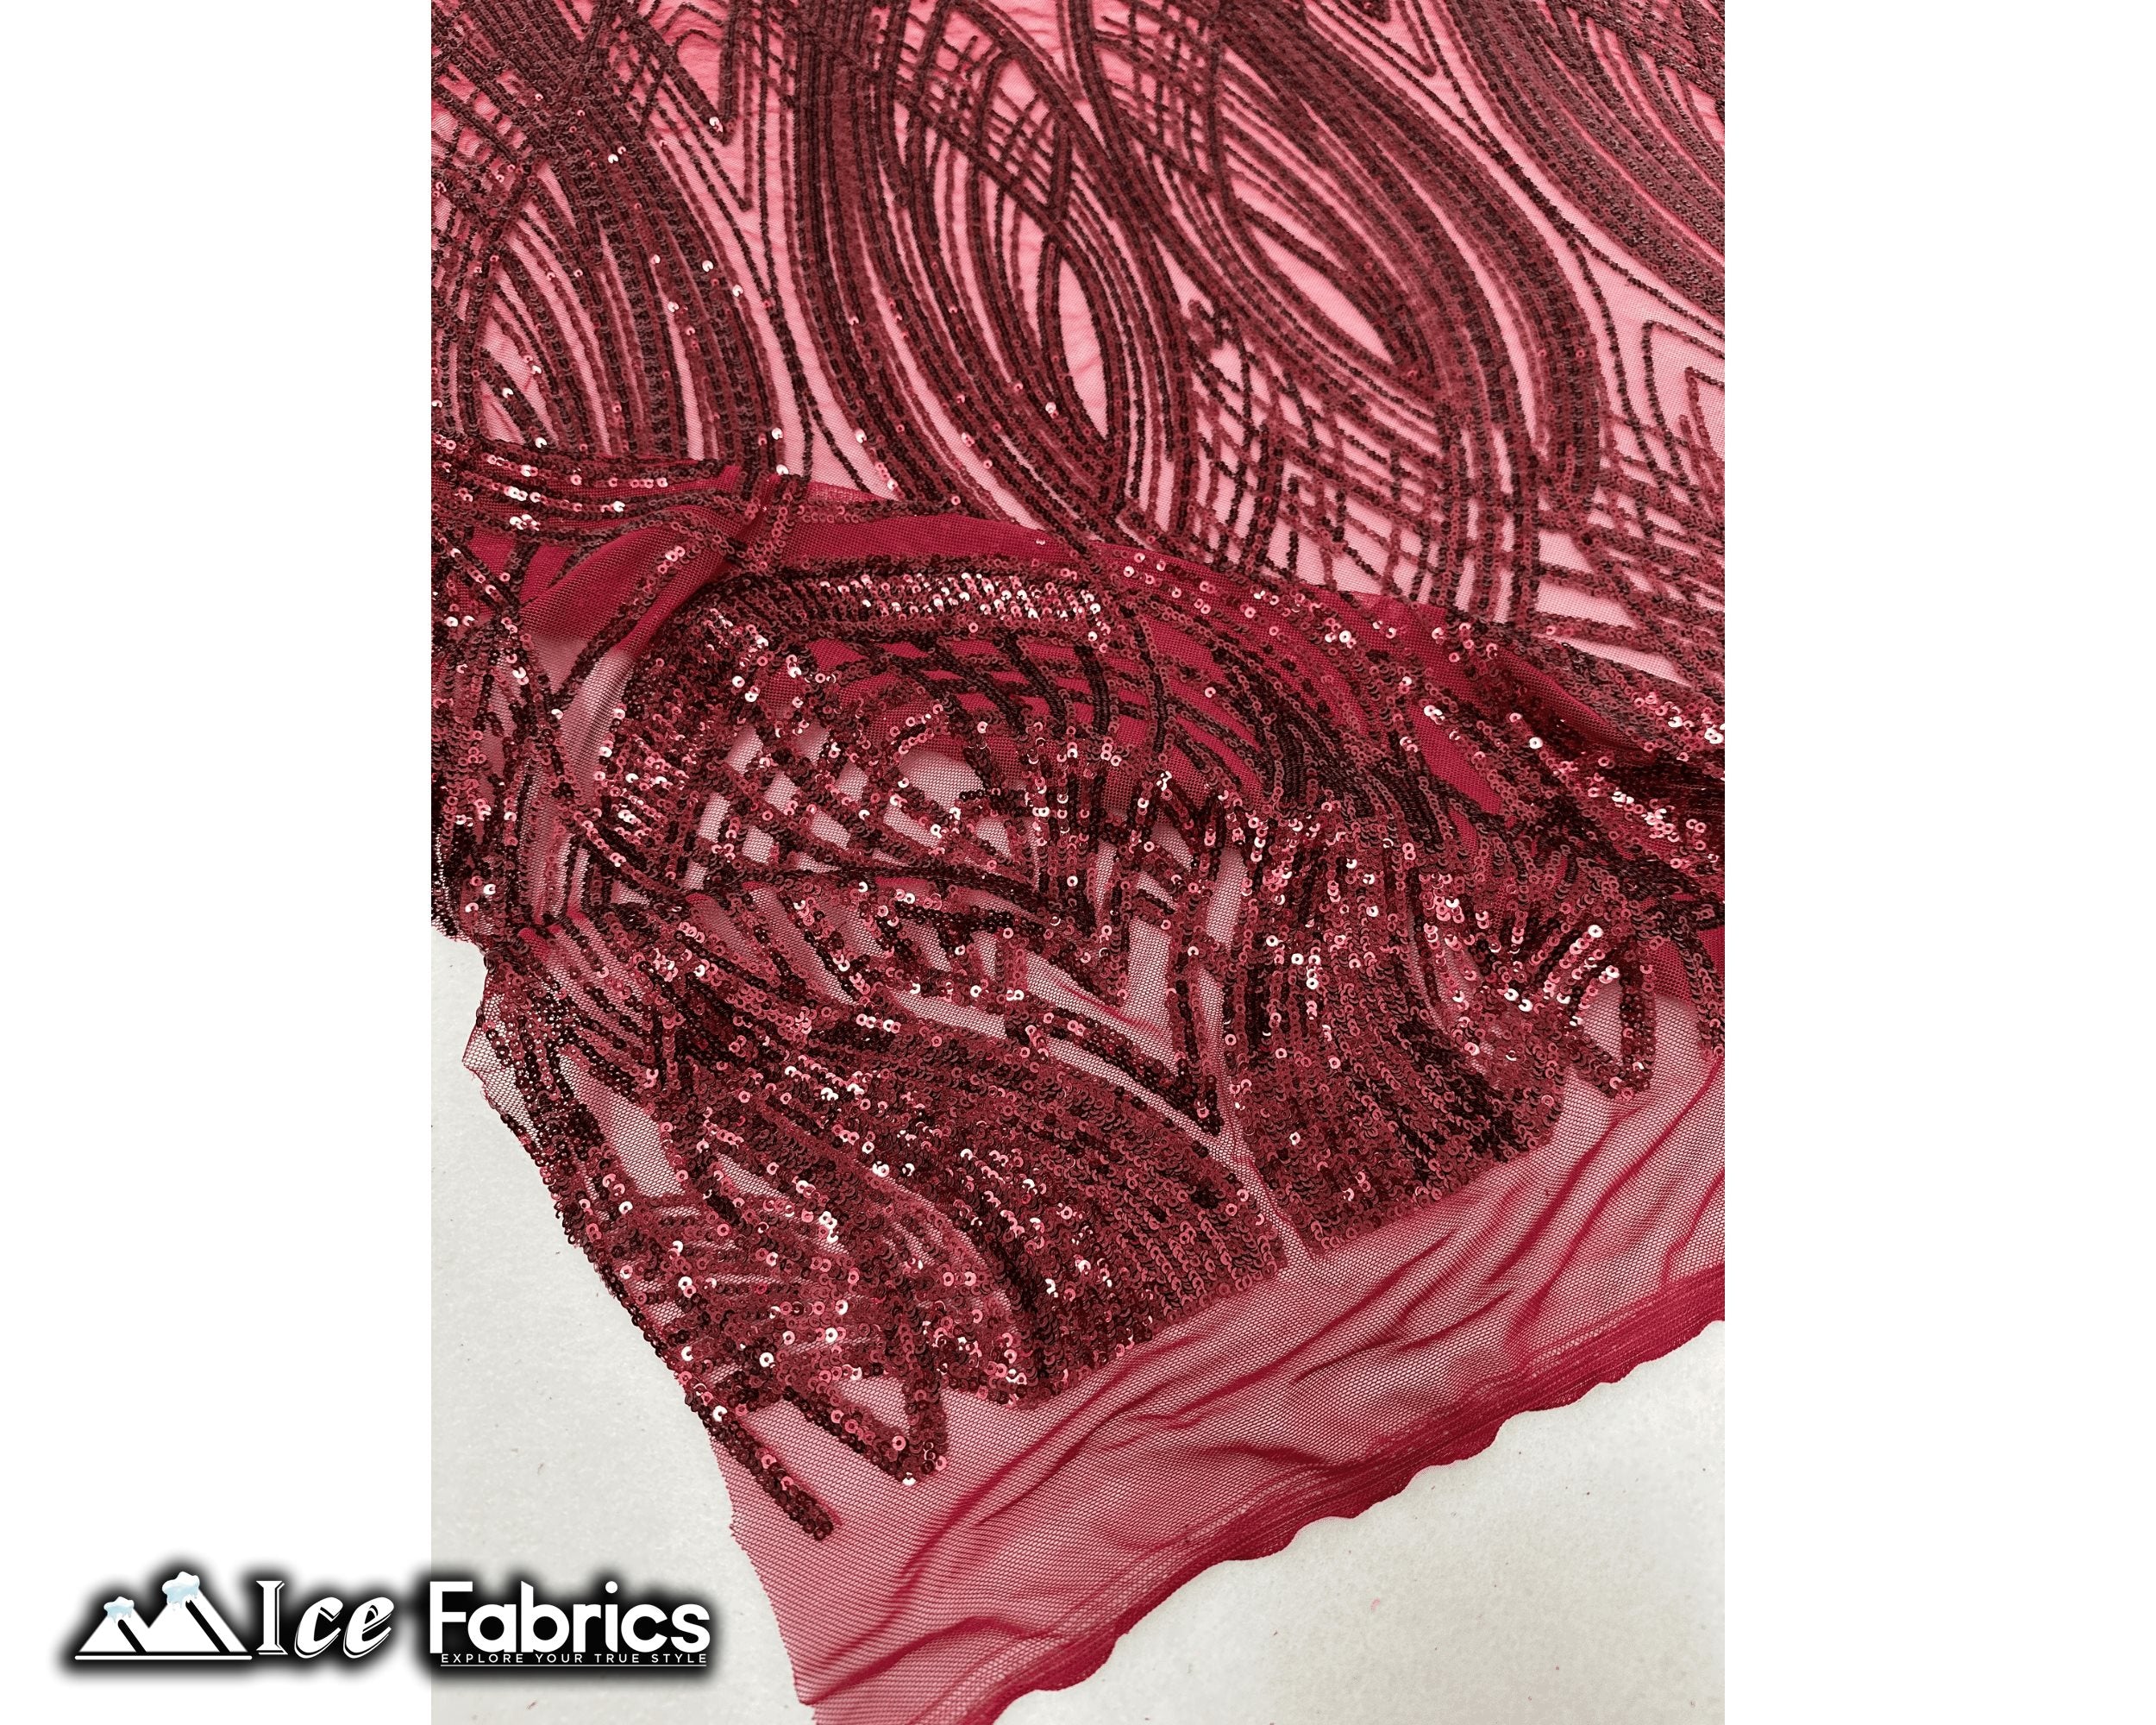 Peacock Sequin Fabric By The Yard 4 Way Stretch Spandex ICE FABRICS Burgundy